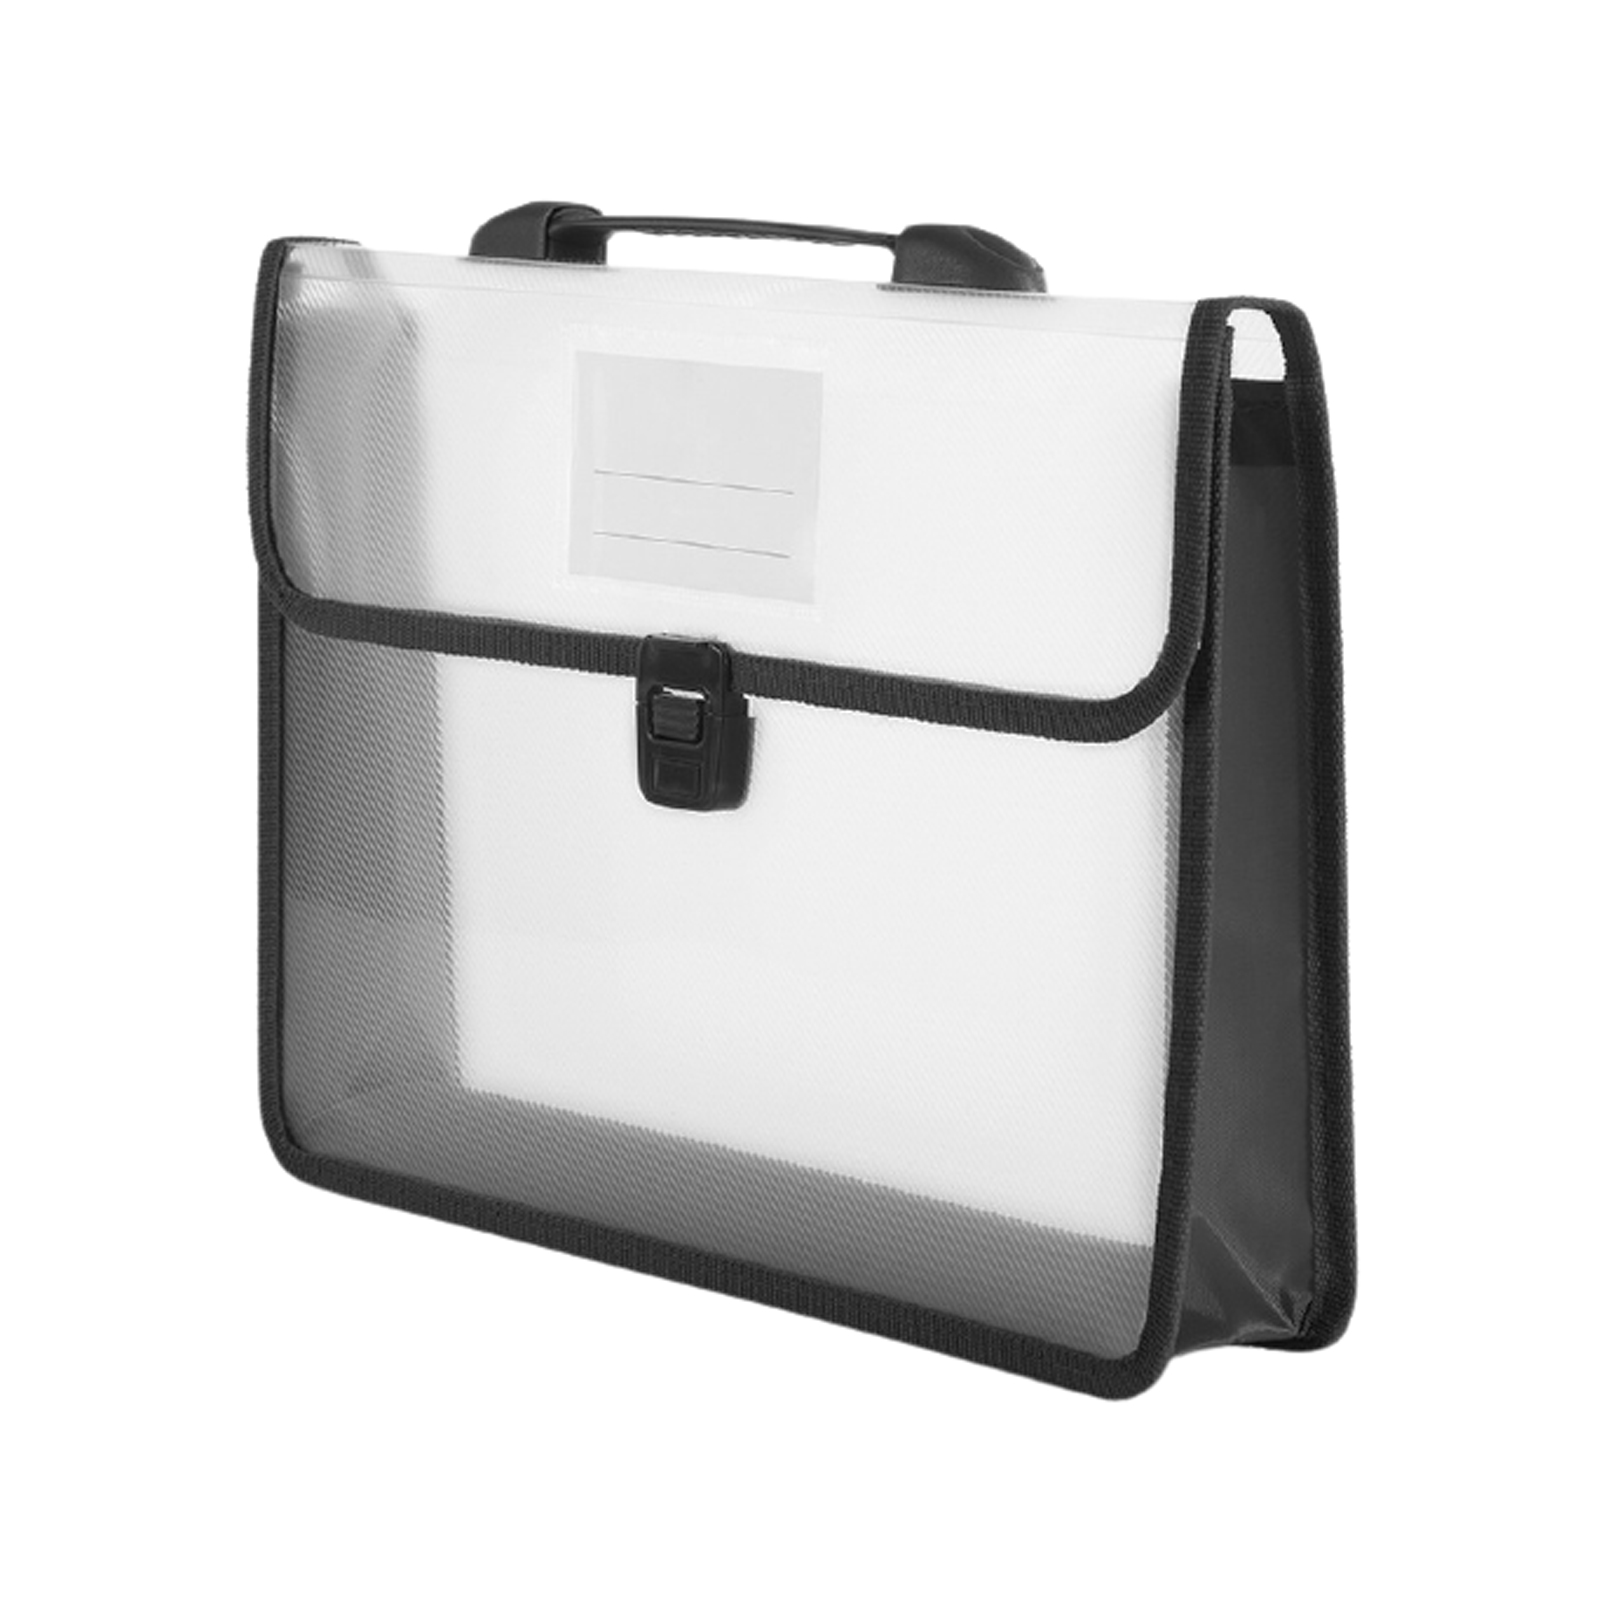 A4 Office PP File Folder Dustproof Thickened Waterproof With Handle Large Capacity Storage Bag Buckle Closure Stationery School